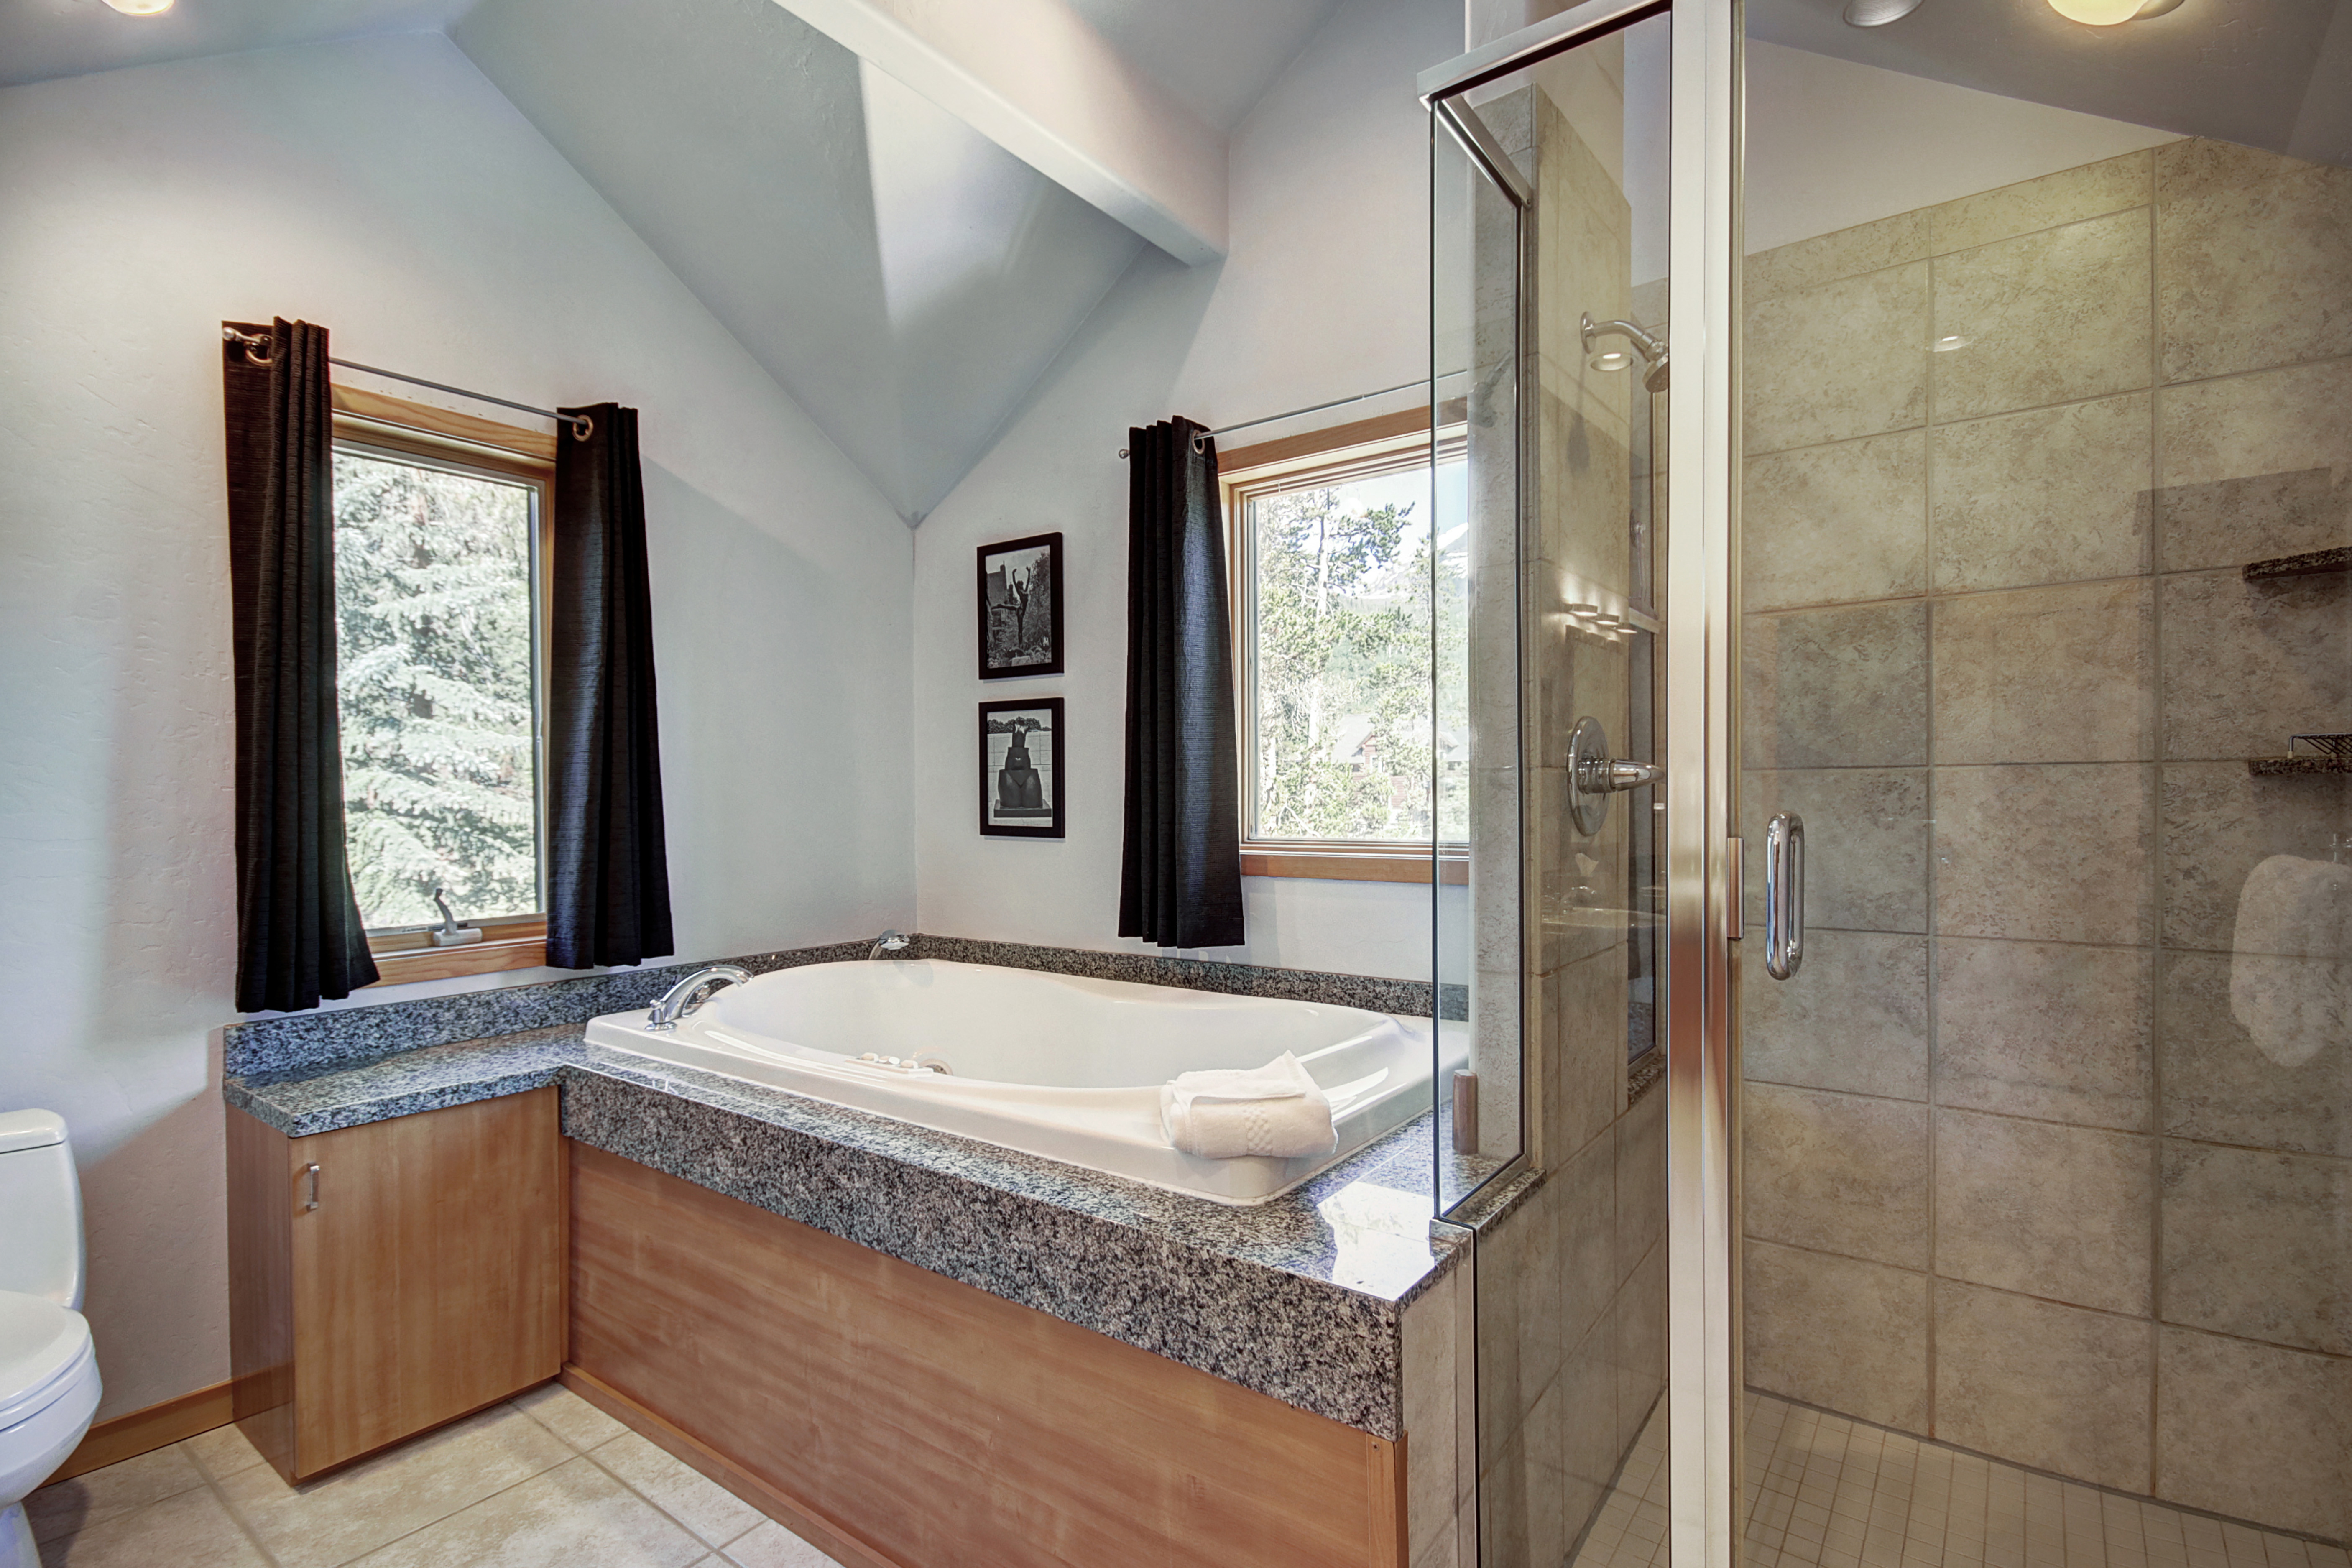 Relax in this spacious jetted tub while taking in the beautiful views. - Buffalo Mountain Vista Frisco Vacation Rental